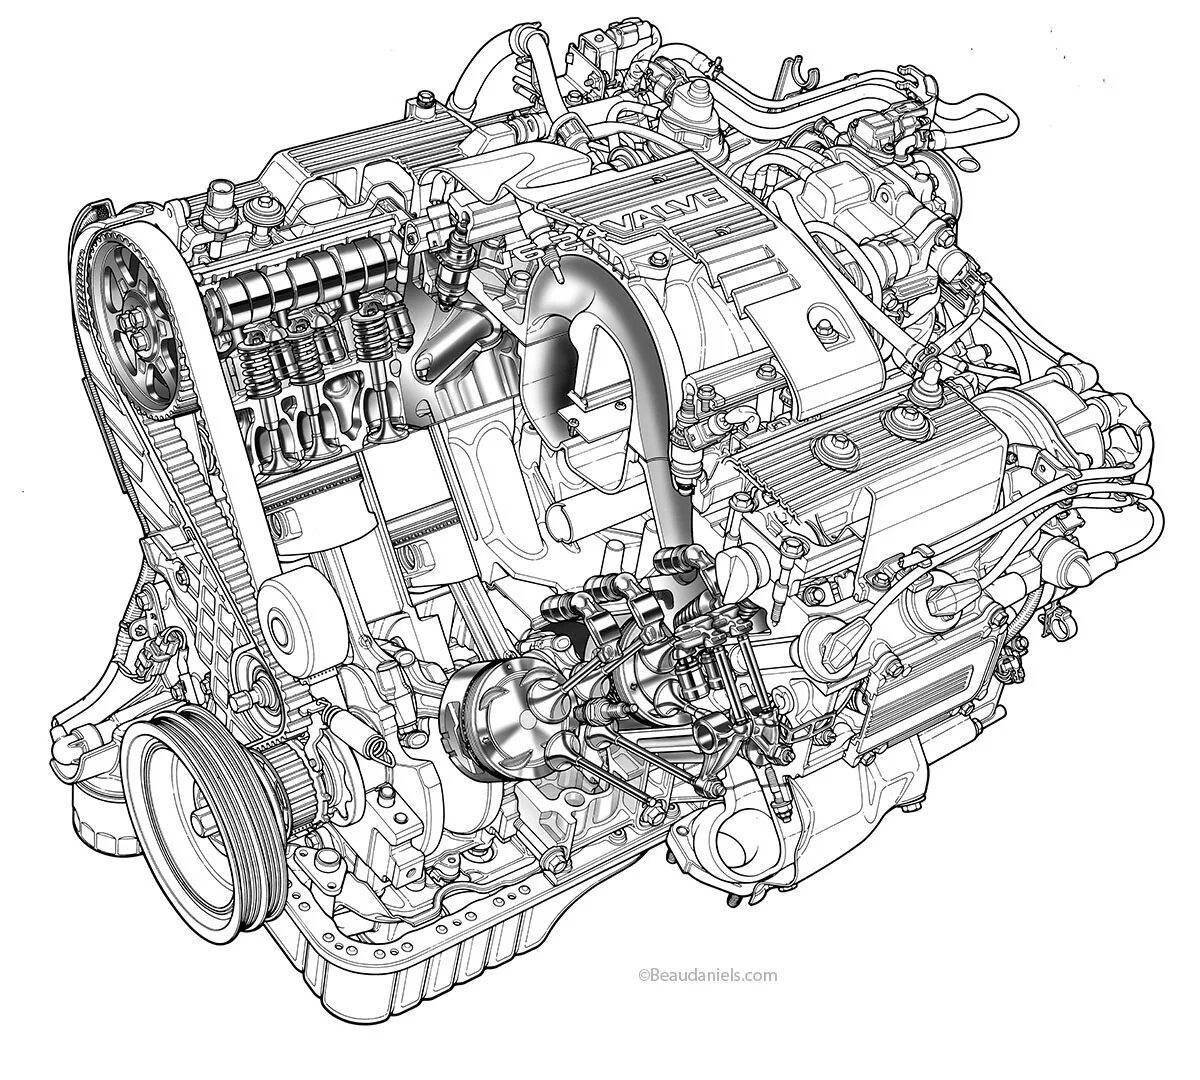 Coloring page wonderful engine